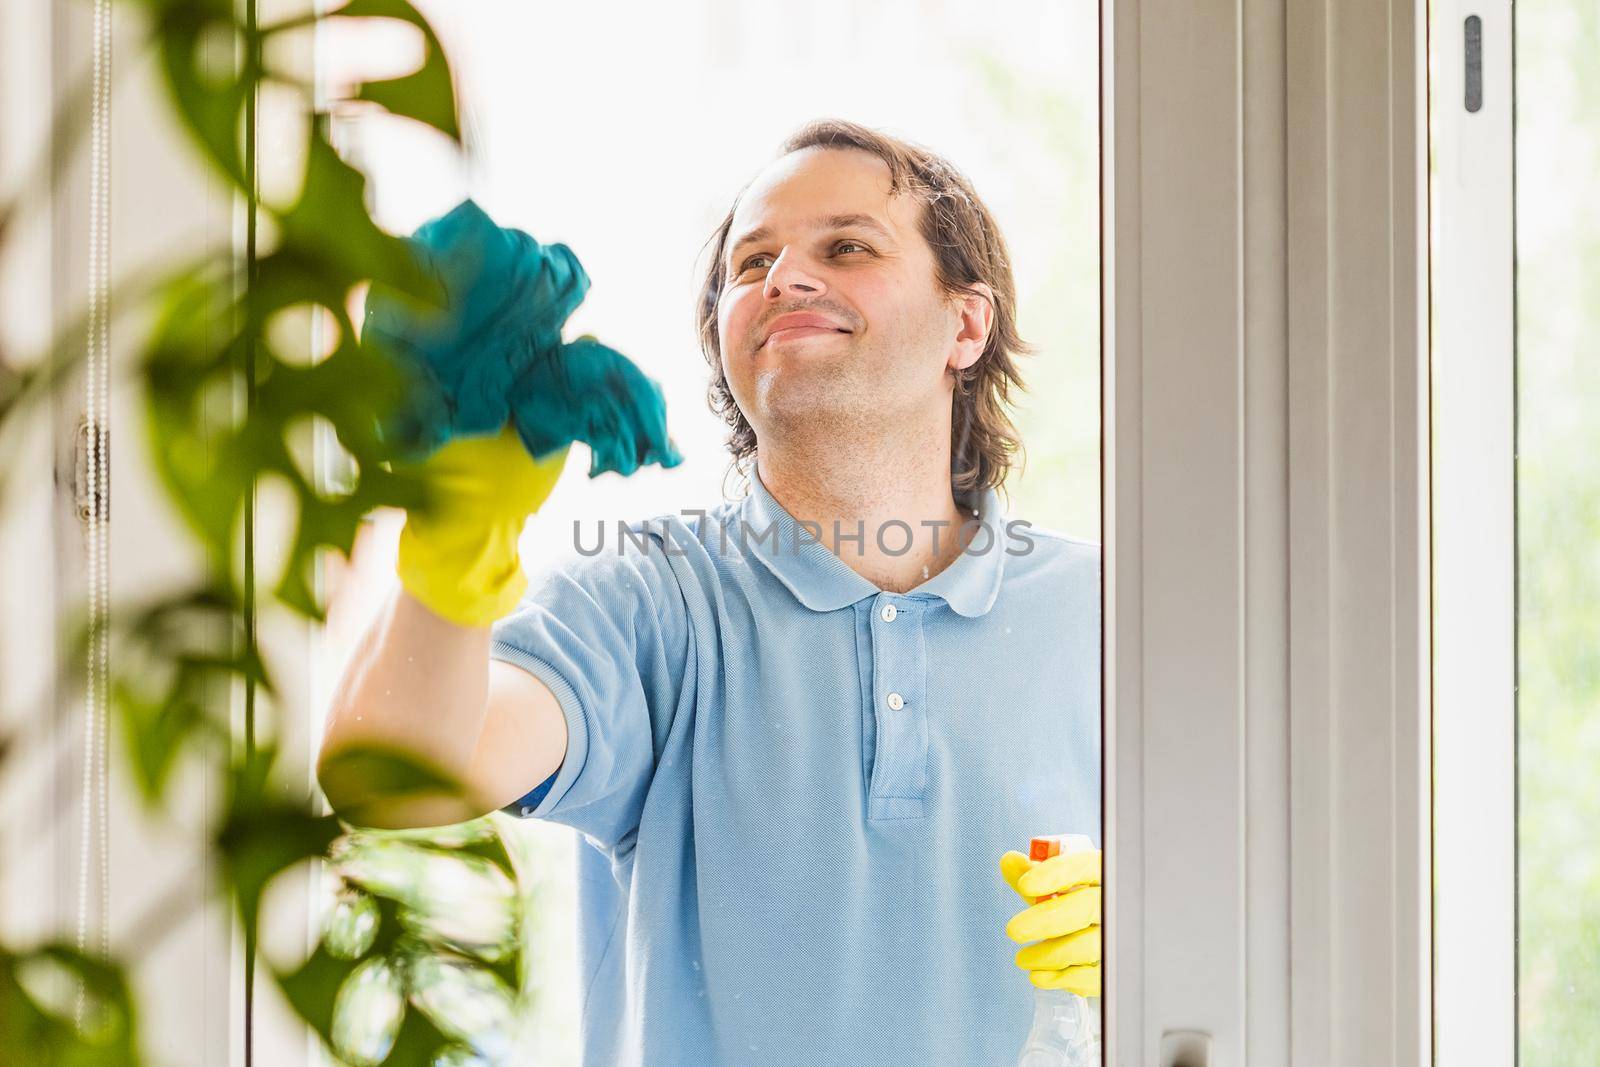 Man wearing yellow protective gloves cleaning windows at home. Doing home chores routine. Selective focus on the face